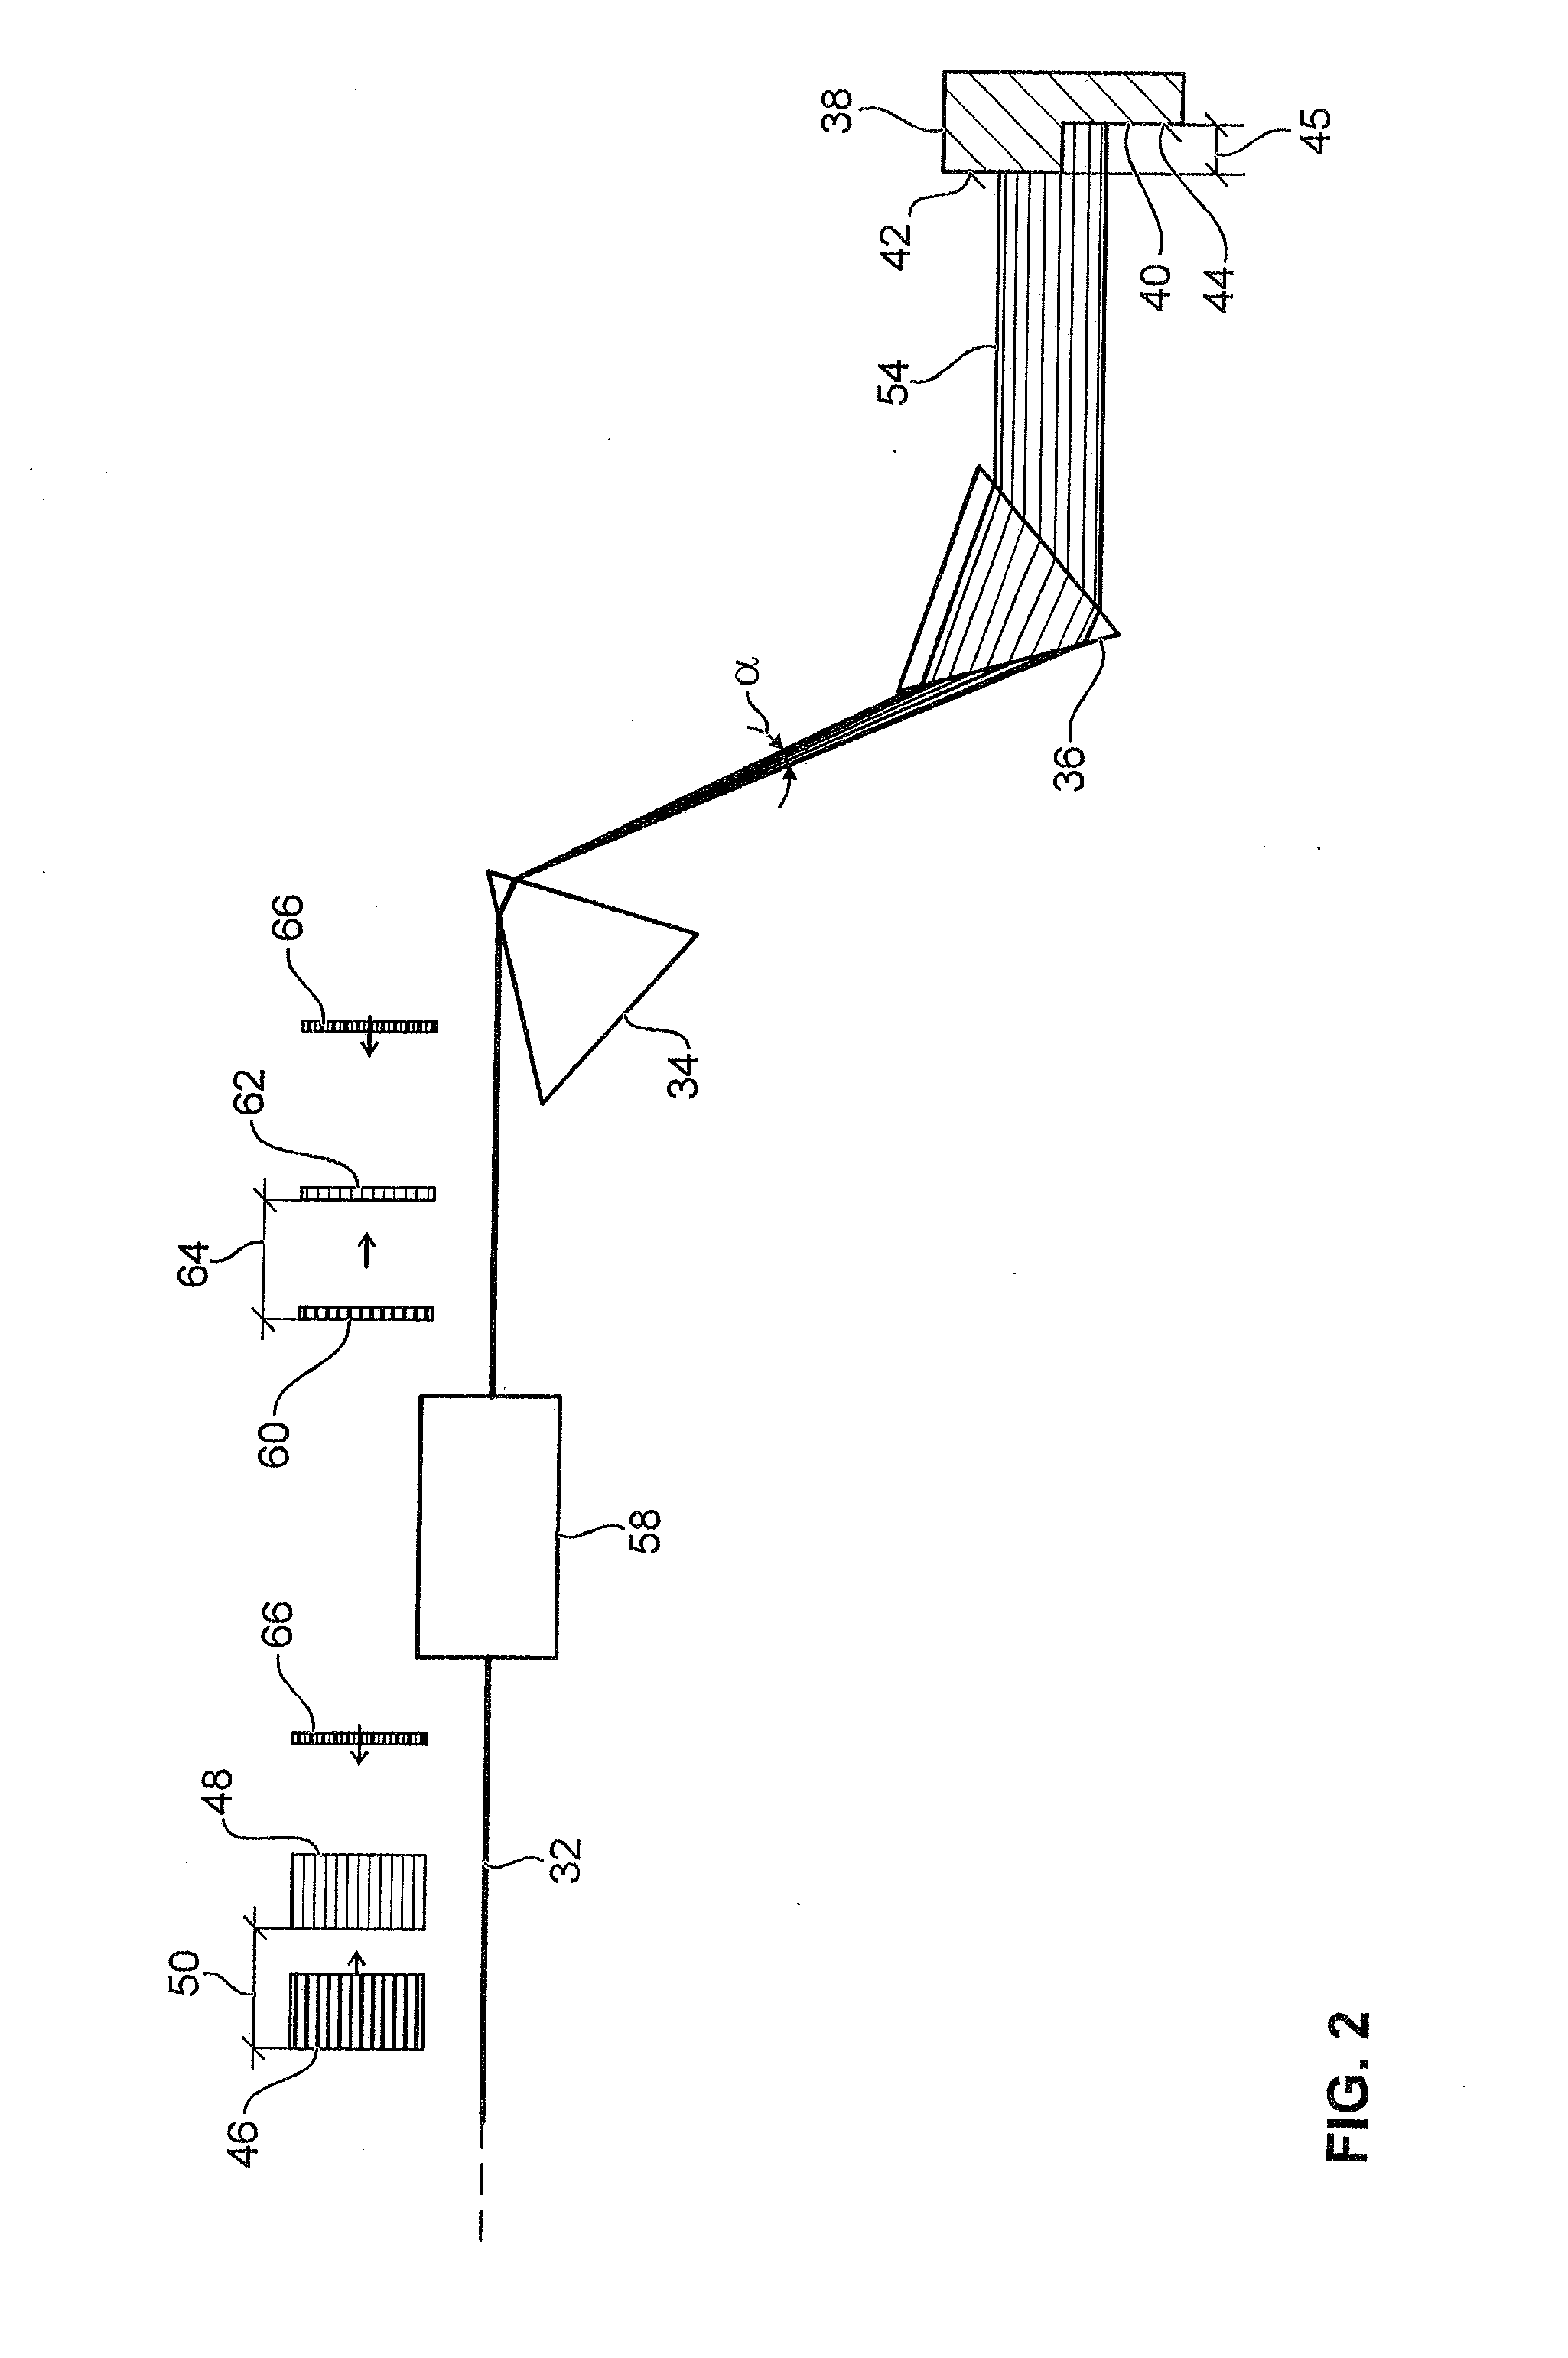 Apparatus for Temporal Displacement of White Light Laser Pulses